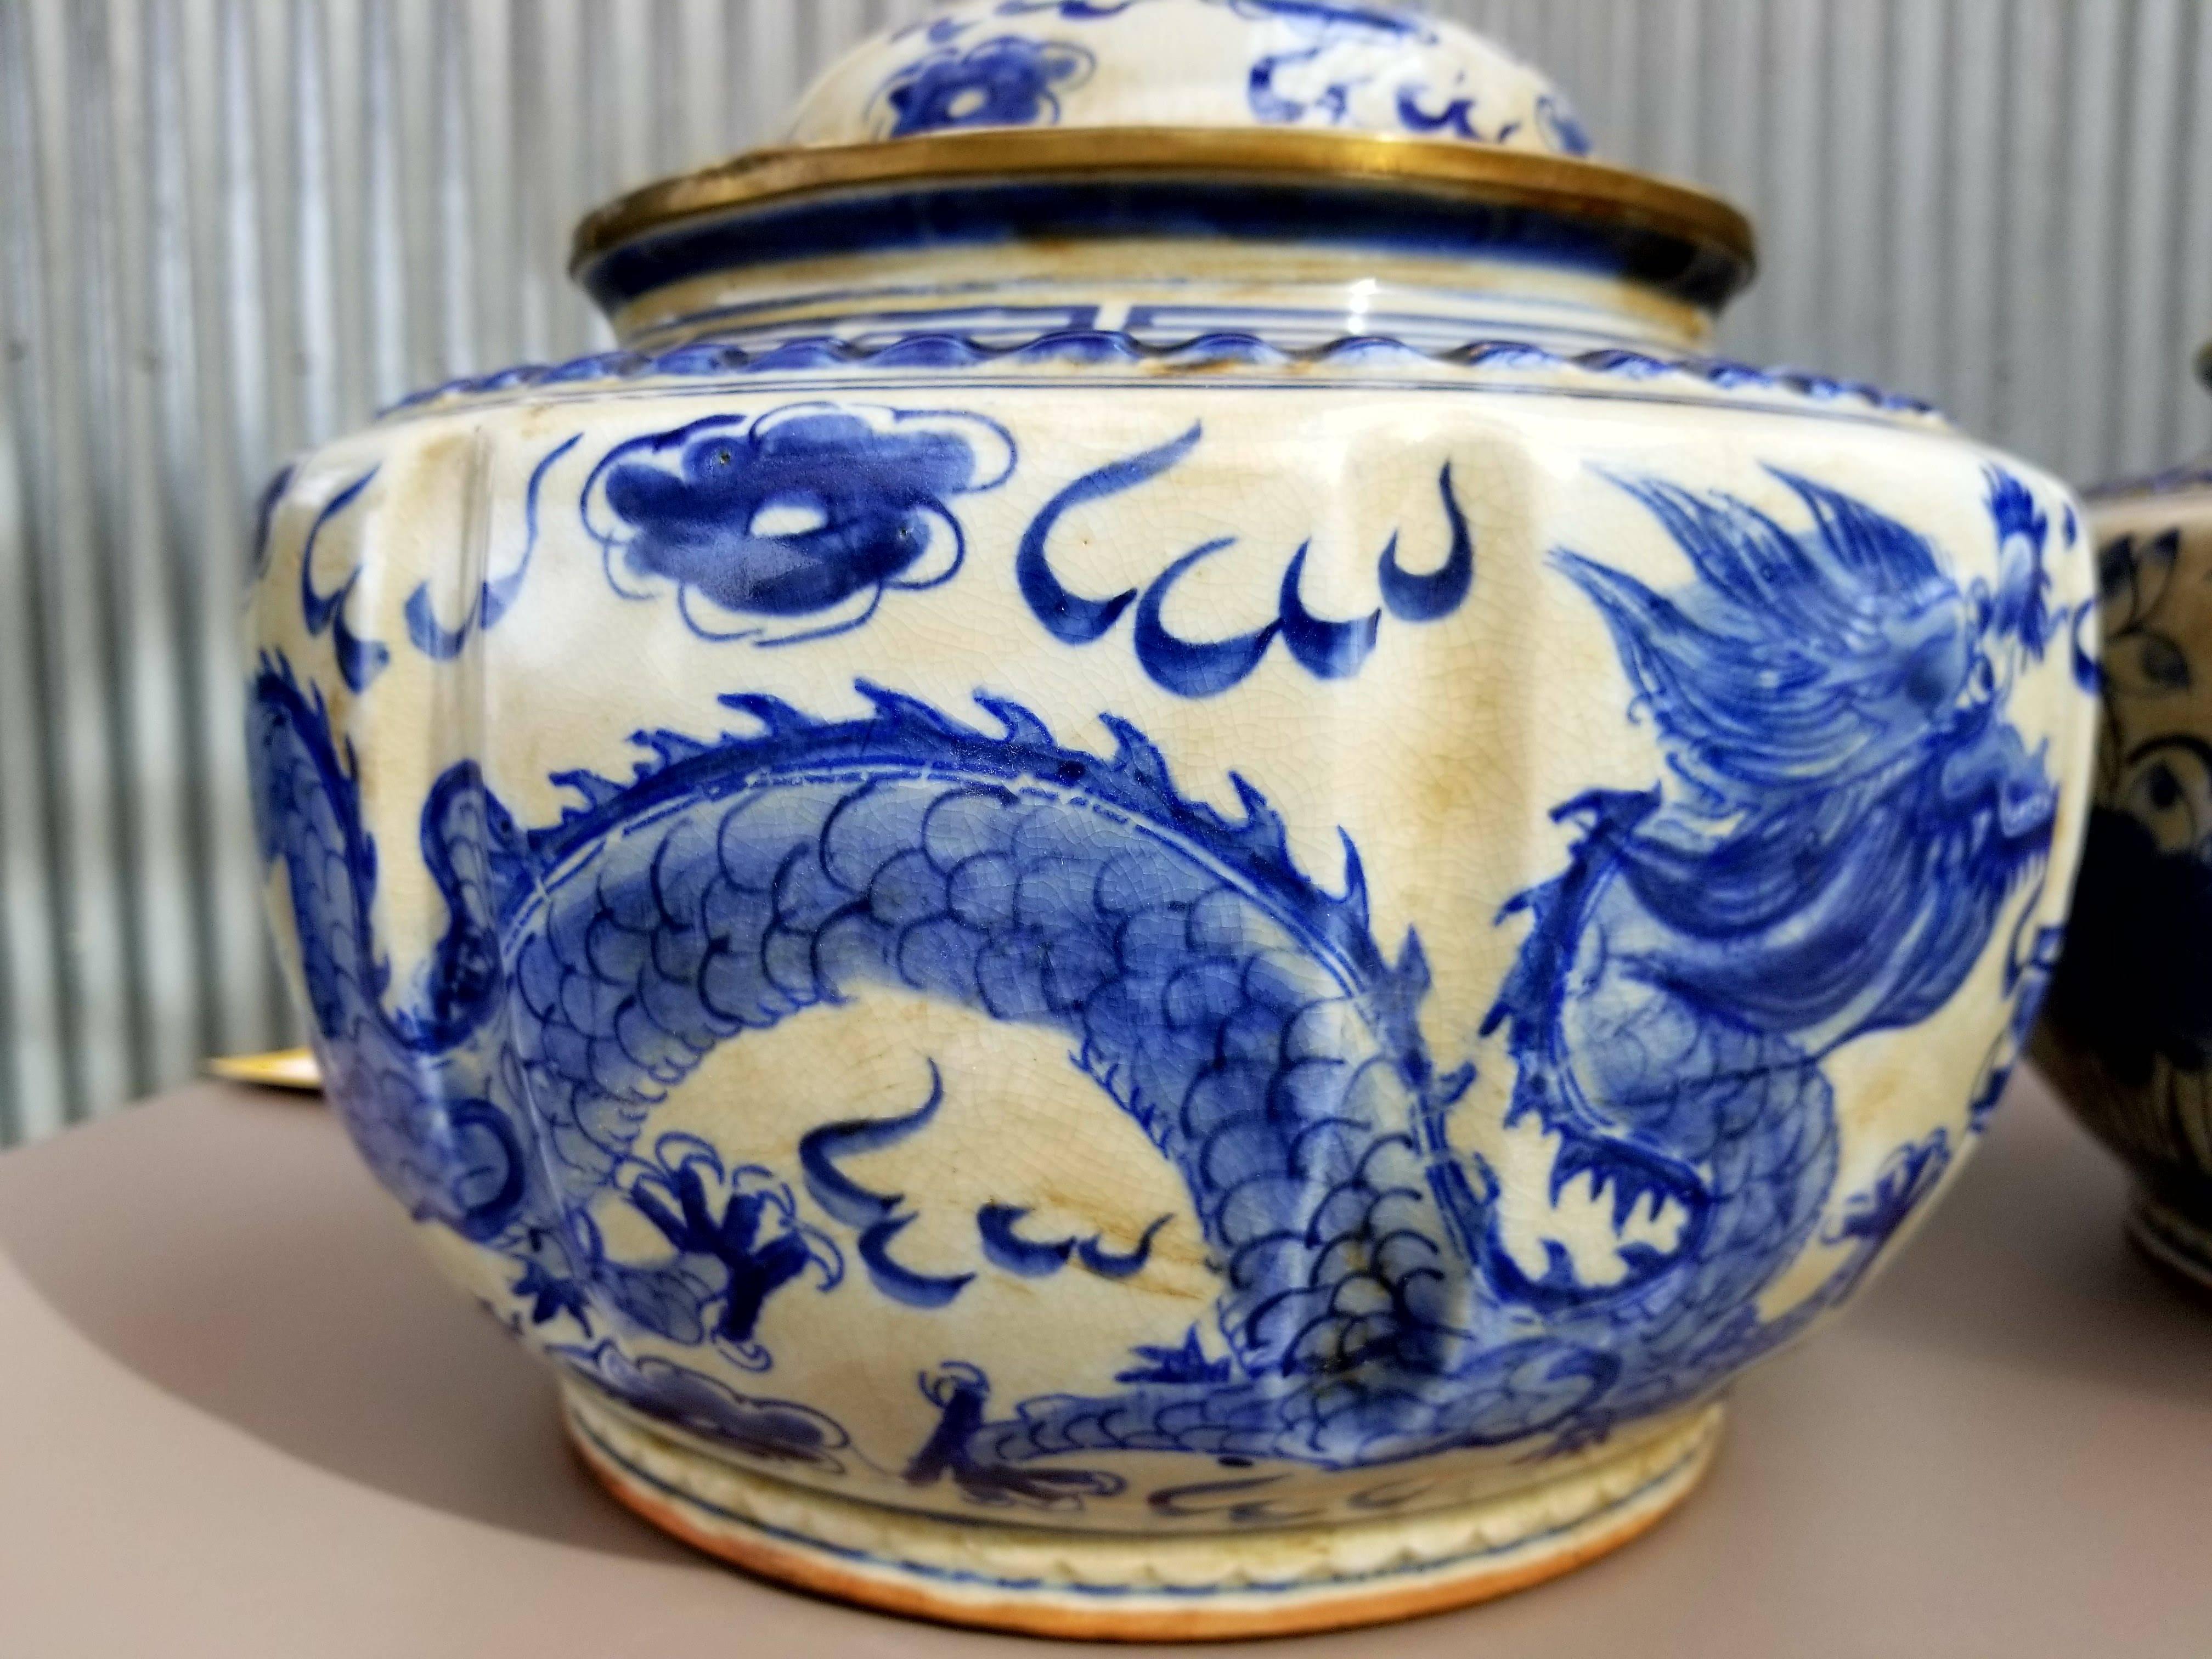 A pair of hand painted Chinese porcelain ginger jars. Depicting a dragon and fish.